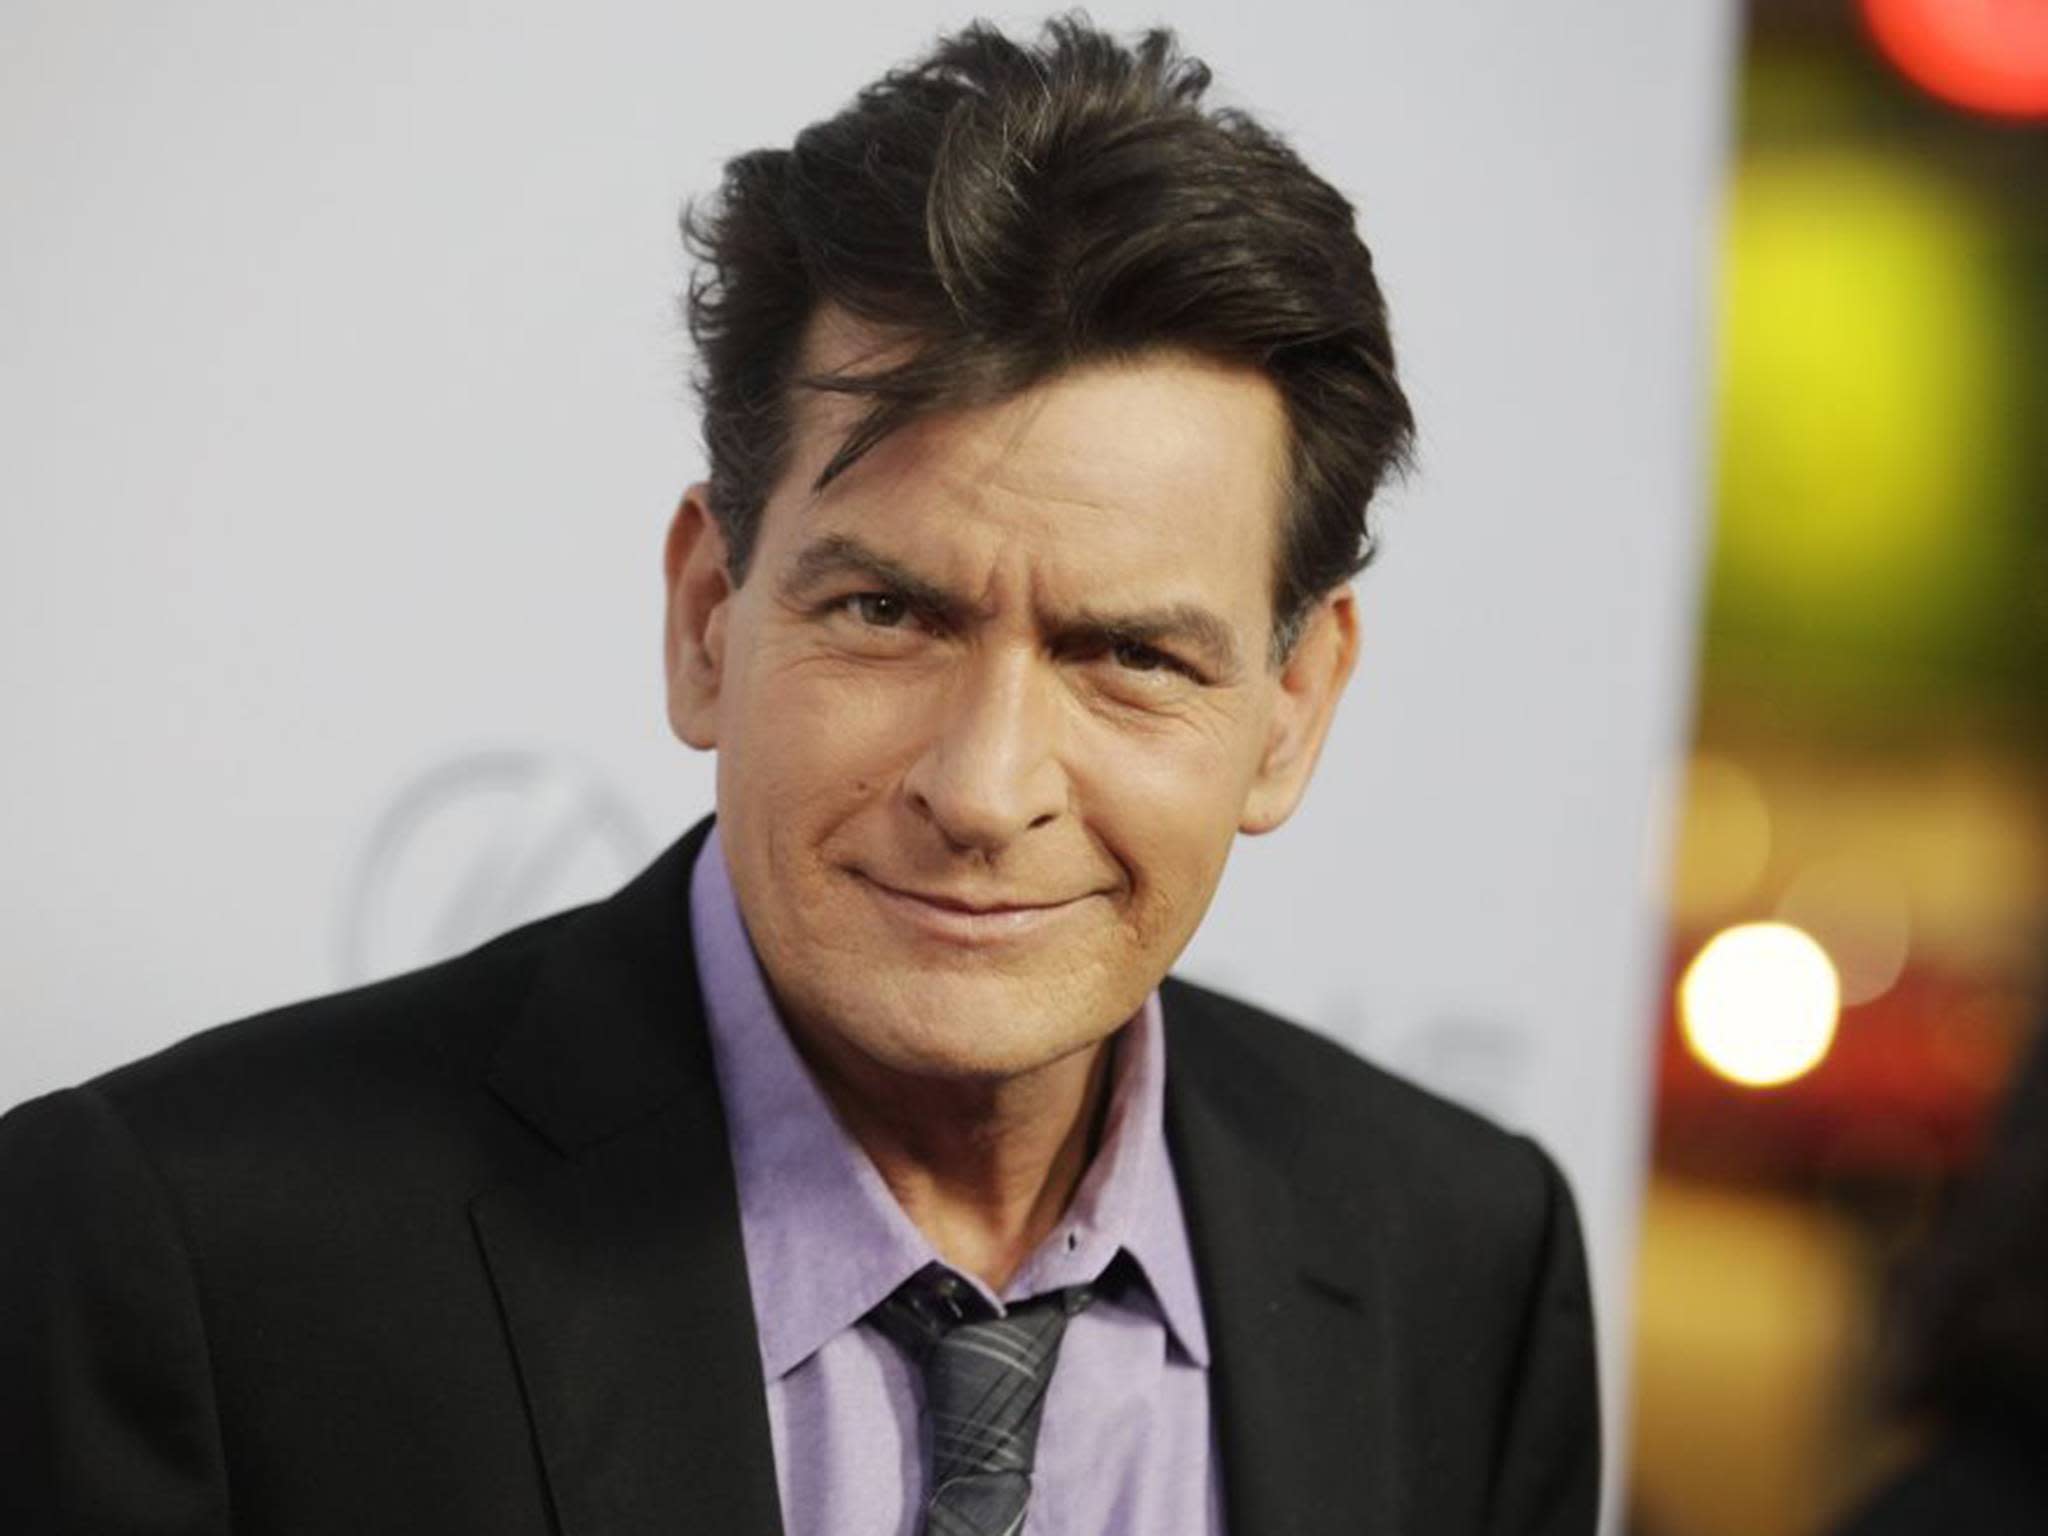 Charlie Sheen Watched Gay Porn Claims Denise Richards